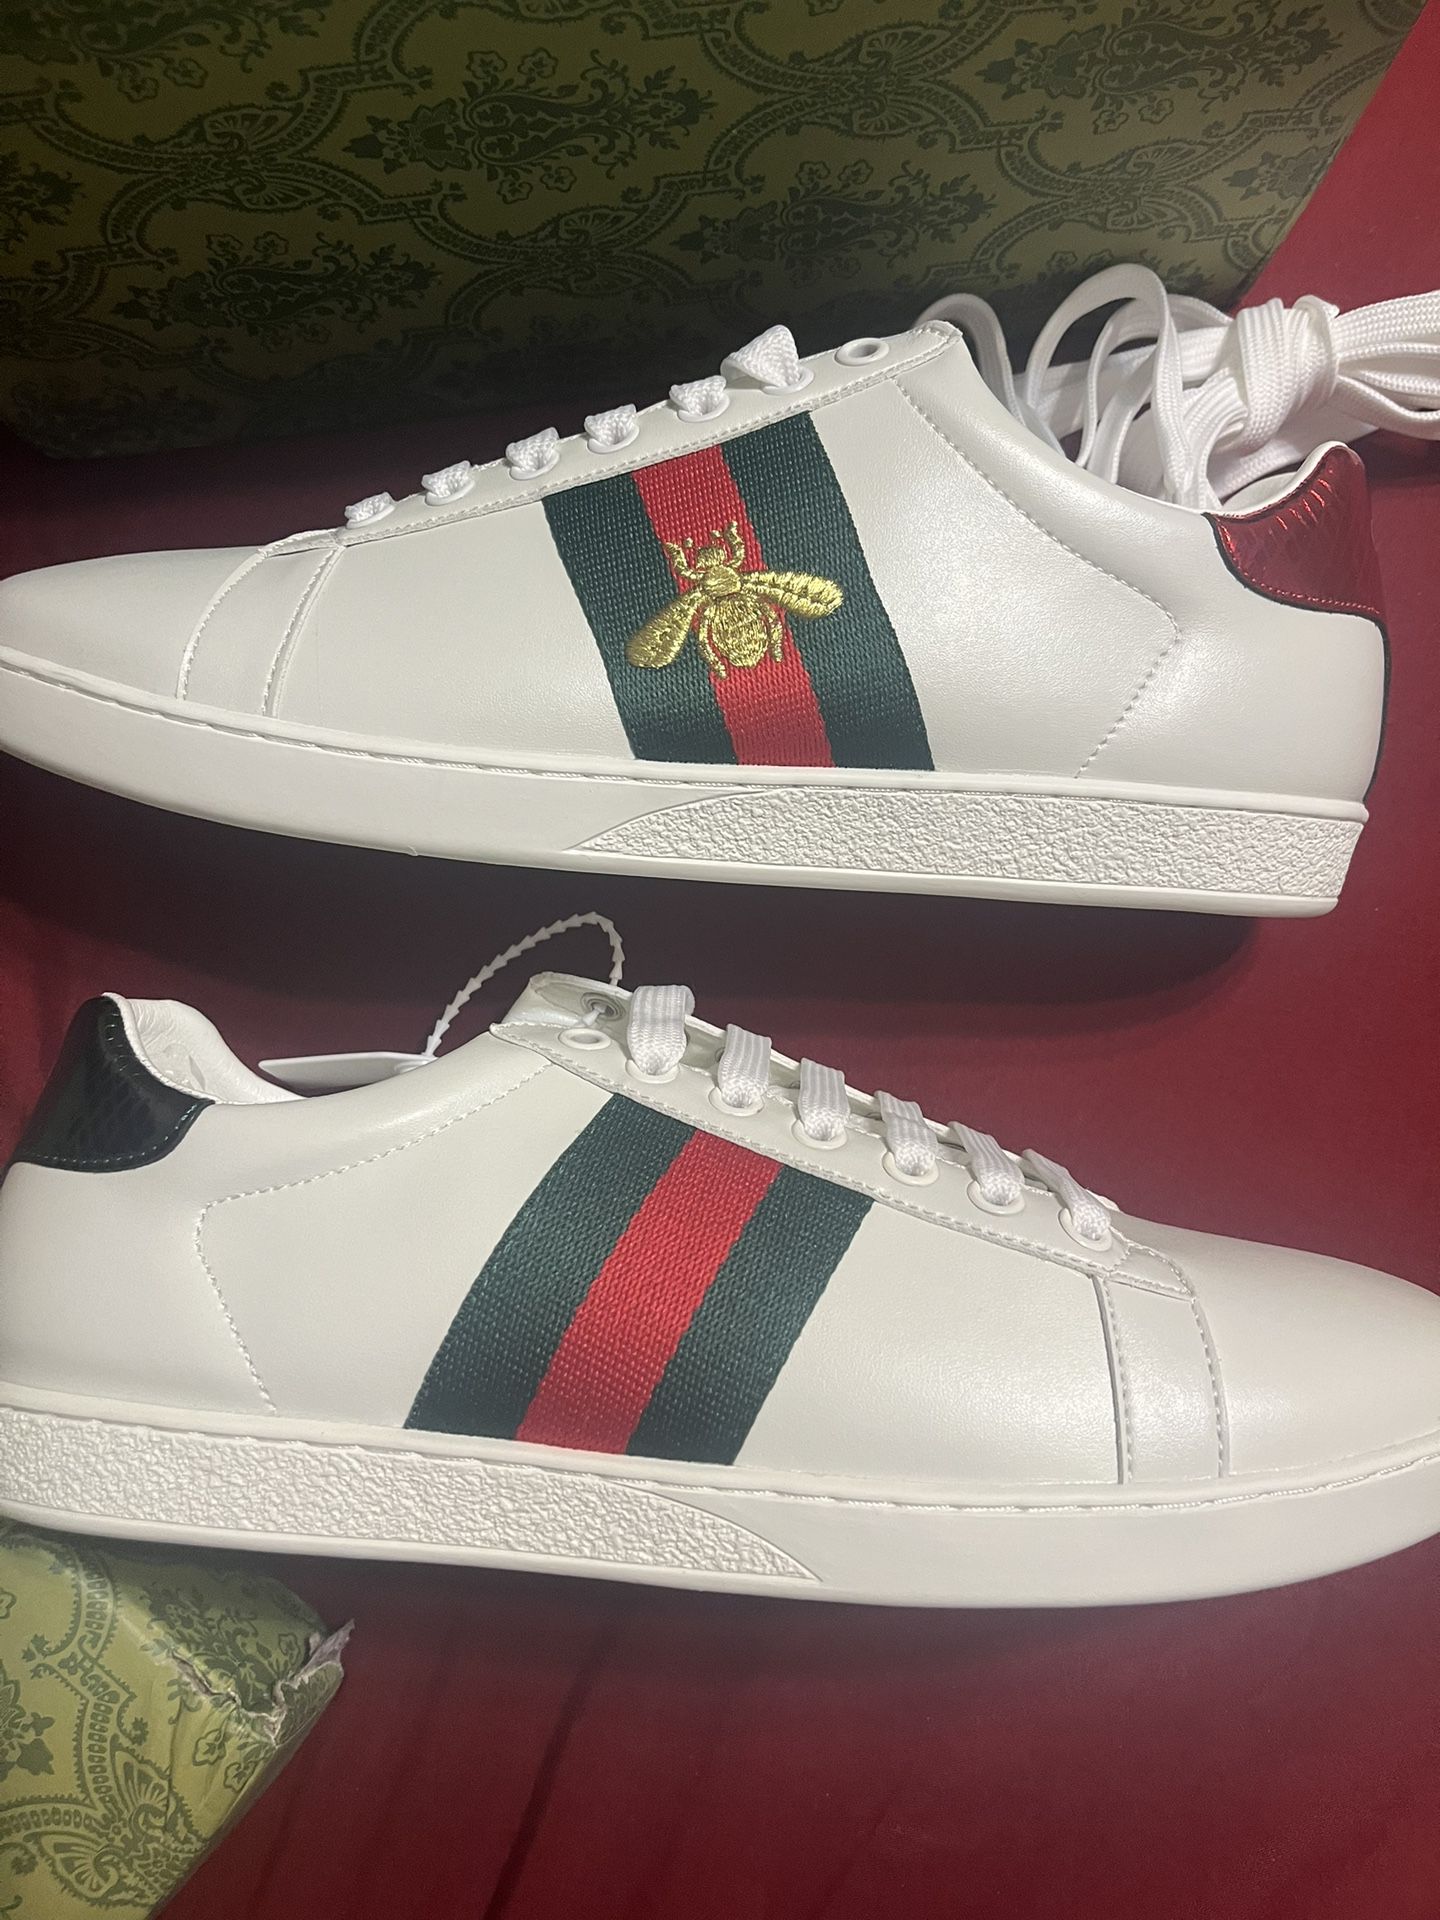 Gucci Ace Embroidered Men Shoes 9 New in Box 